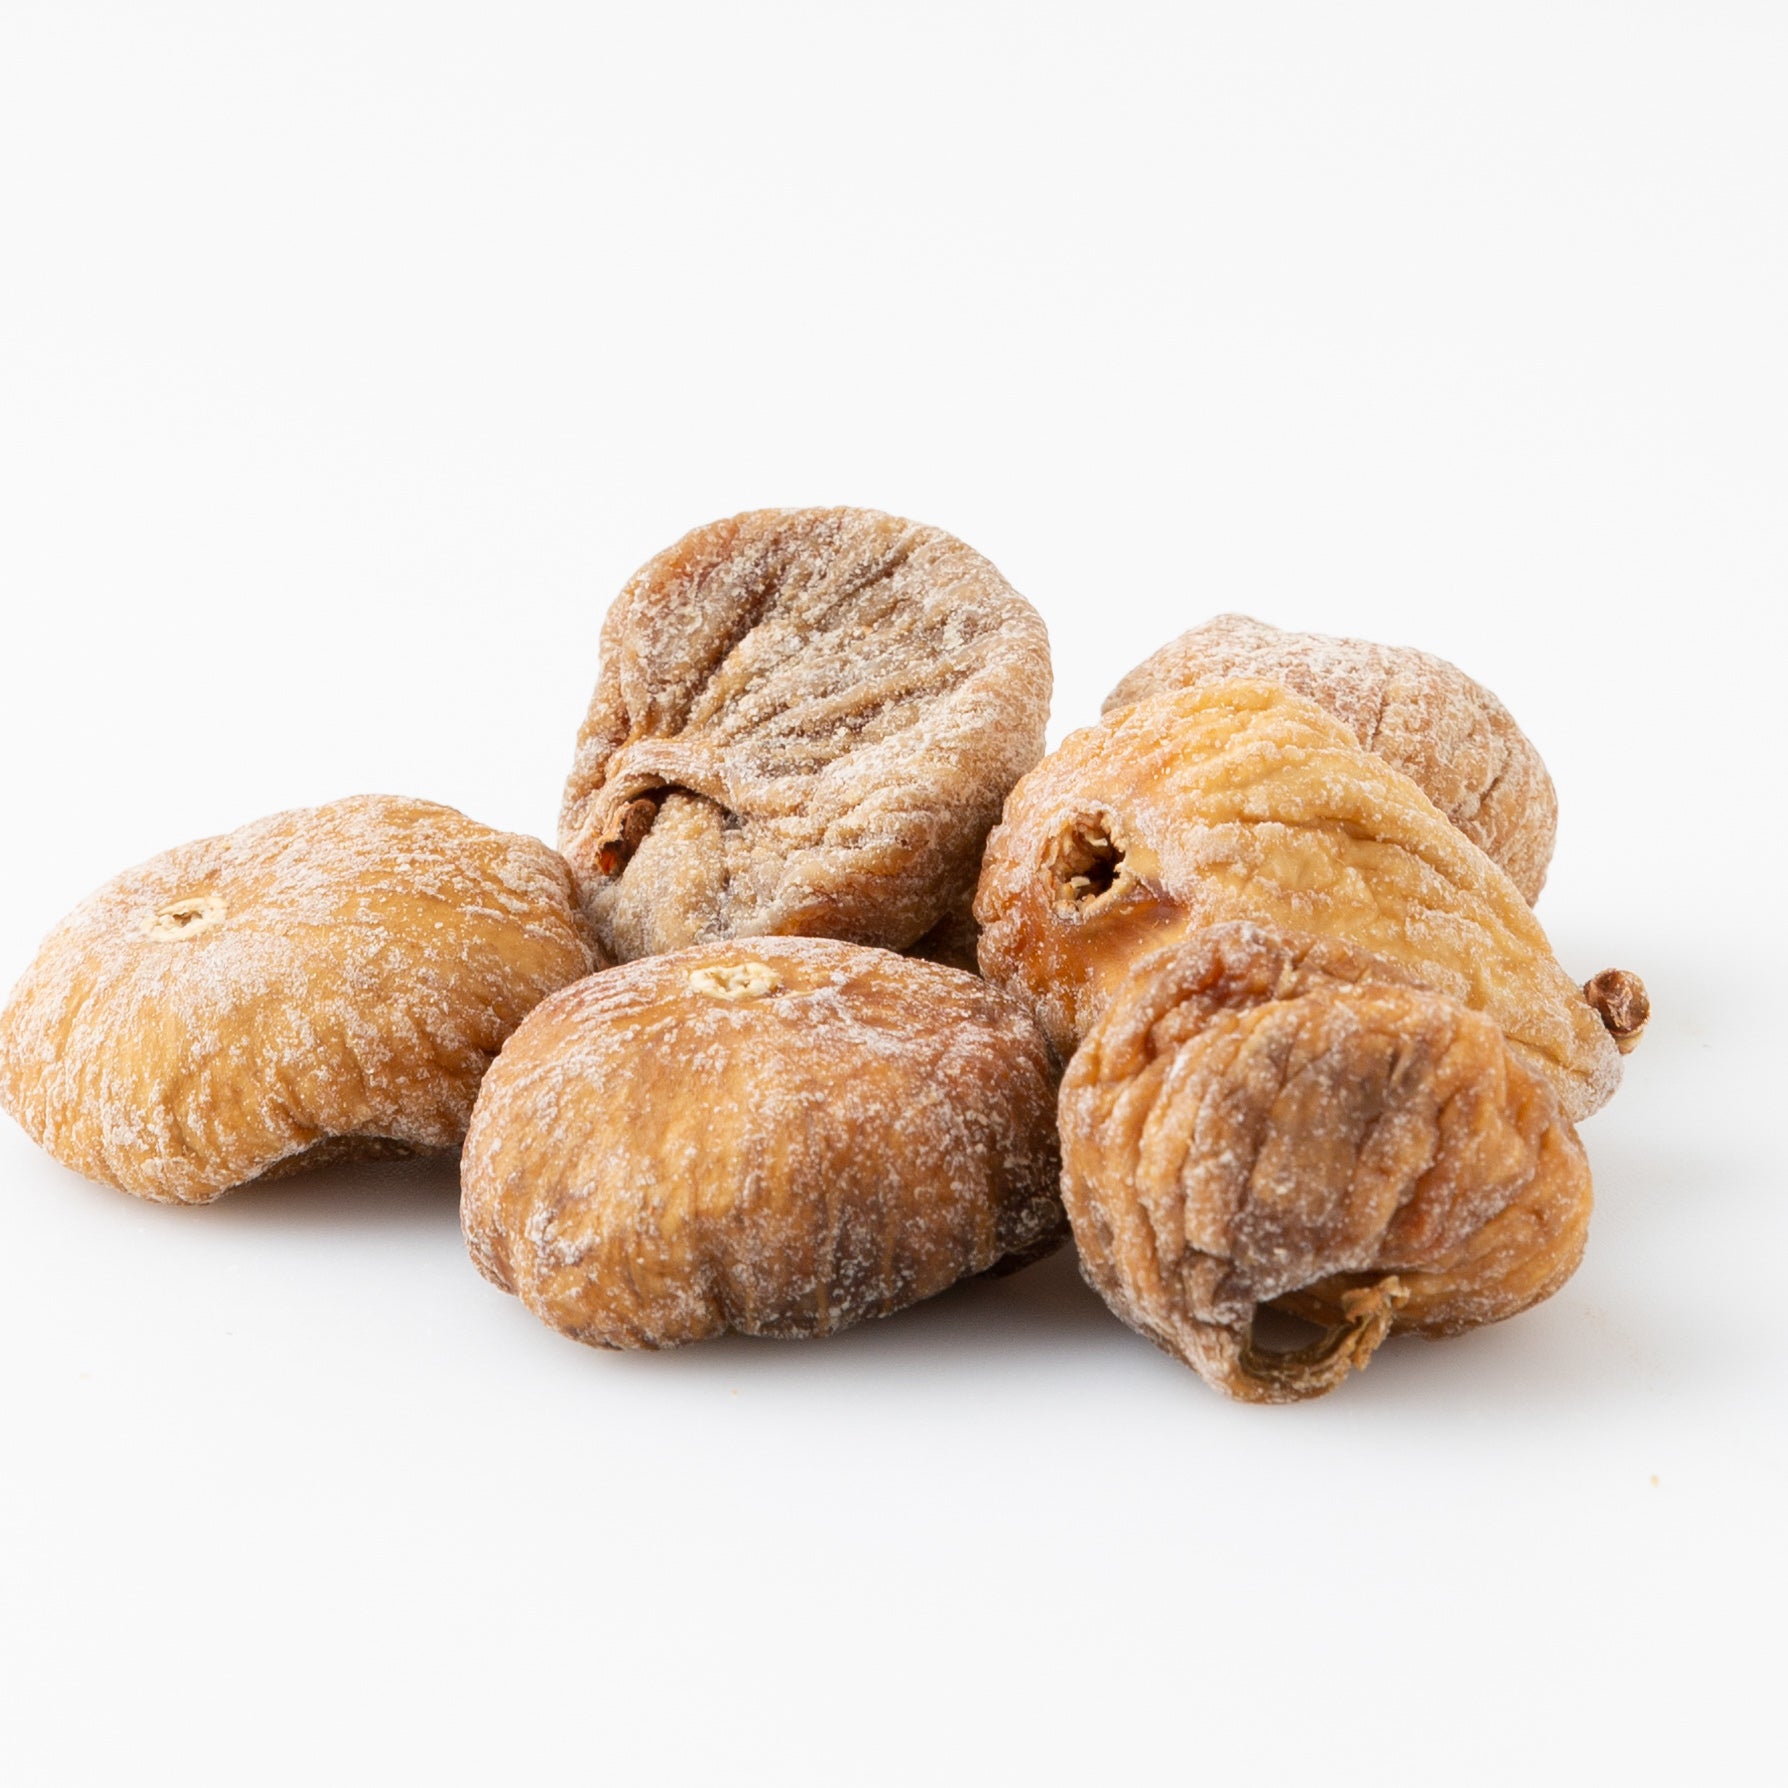 Organic Dried Figs (Dried Fruits) Image 1 - Naked Foods